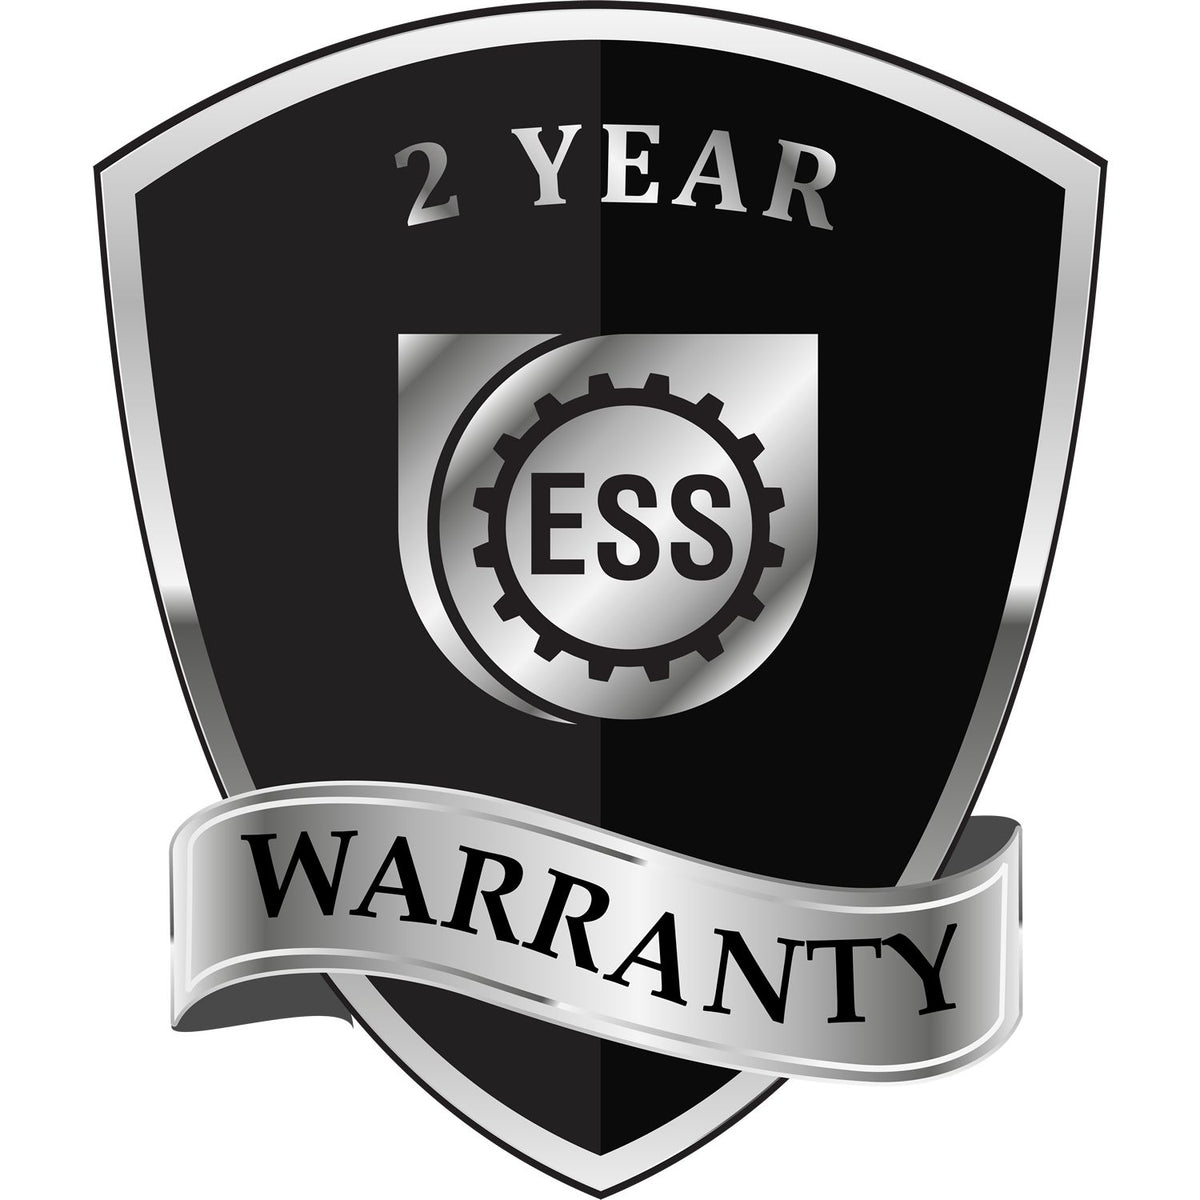 A black and silver badge or emblem showing warranty information for the Handheld Arizona Professional Geologist Embosser